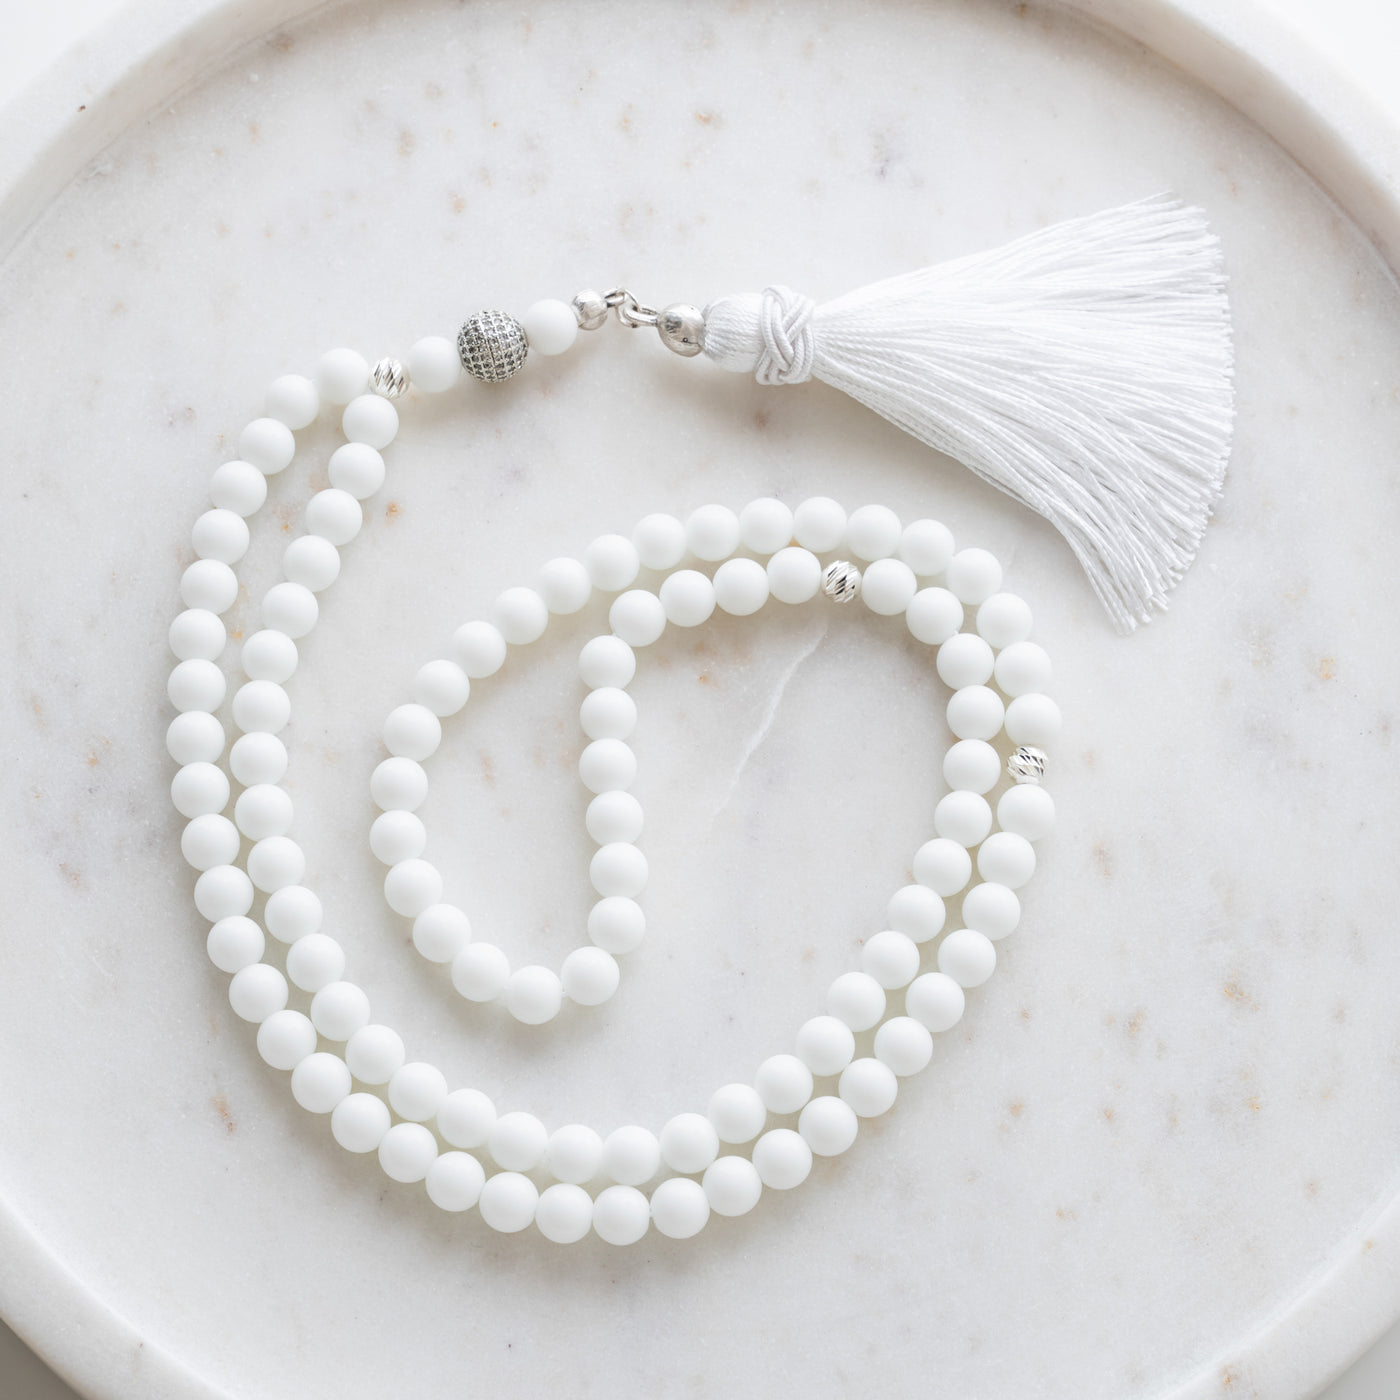 99 Prayer beads - White Quartz Gemstone. All Seven Sajada Misbaha are made with cubic zirconia and sterling silver separators. The Tasbih are handmade in Turkey with big attention to details and quality.